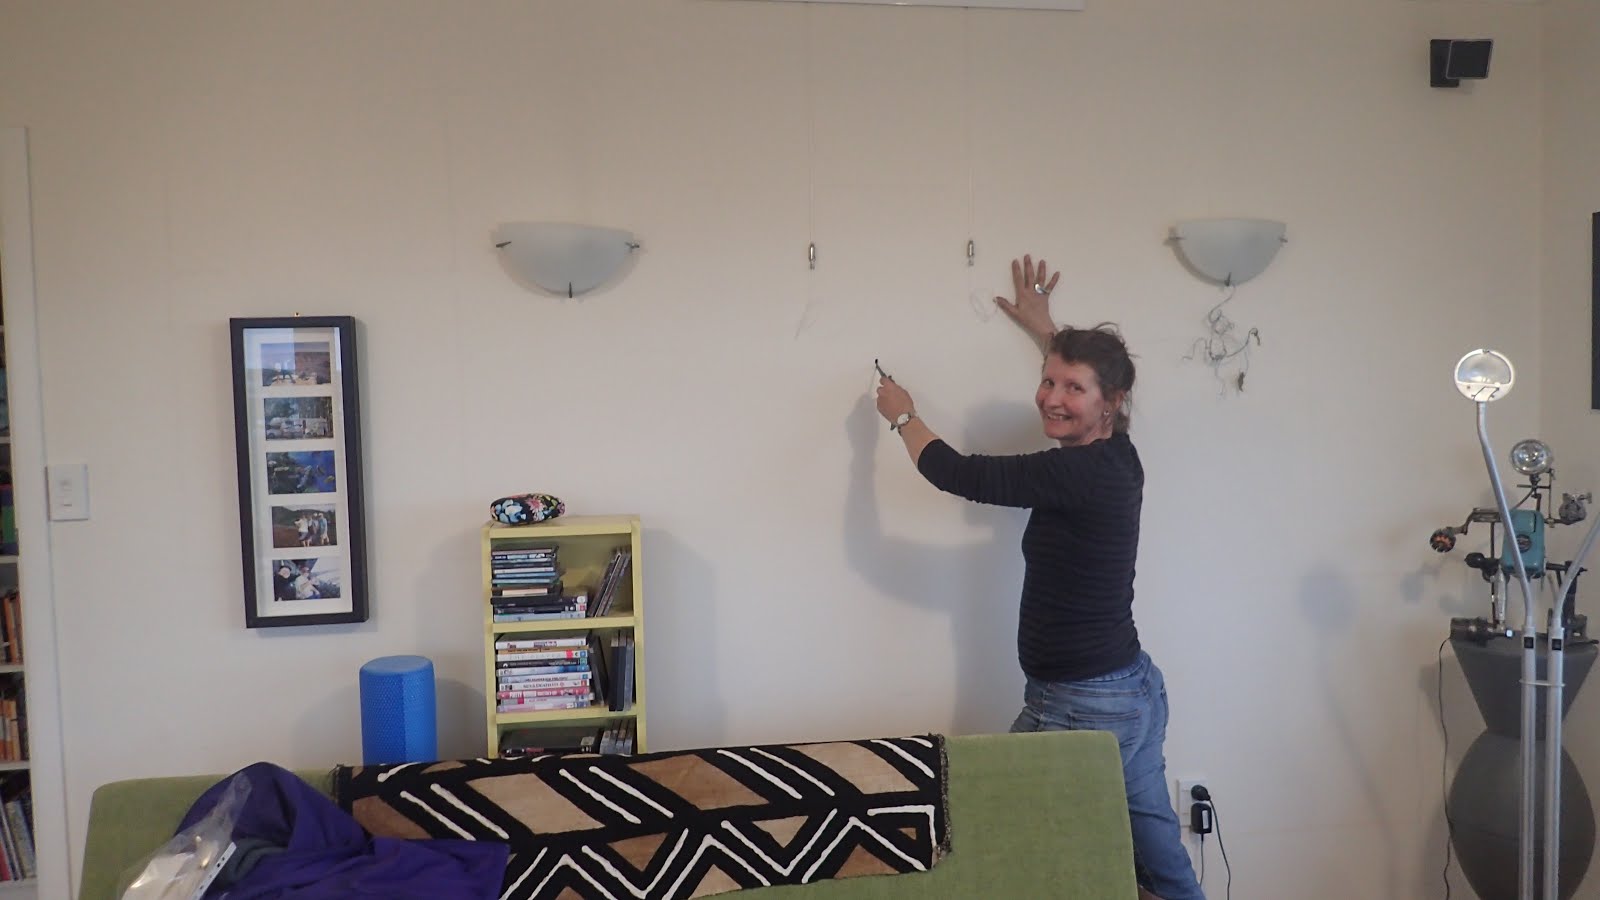 Mish at work: Let's cut holes in this wall